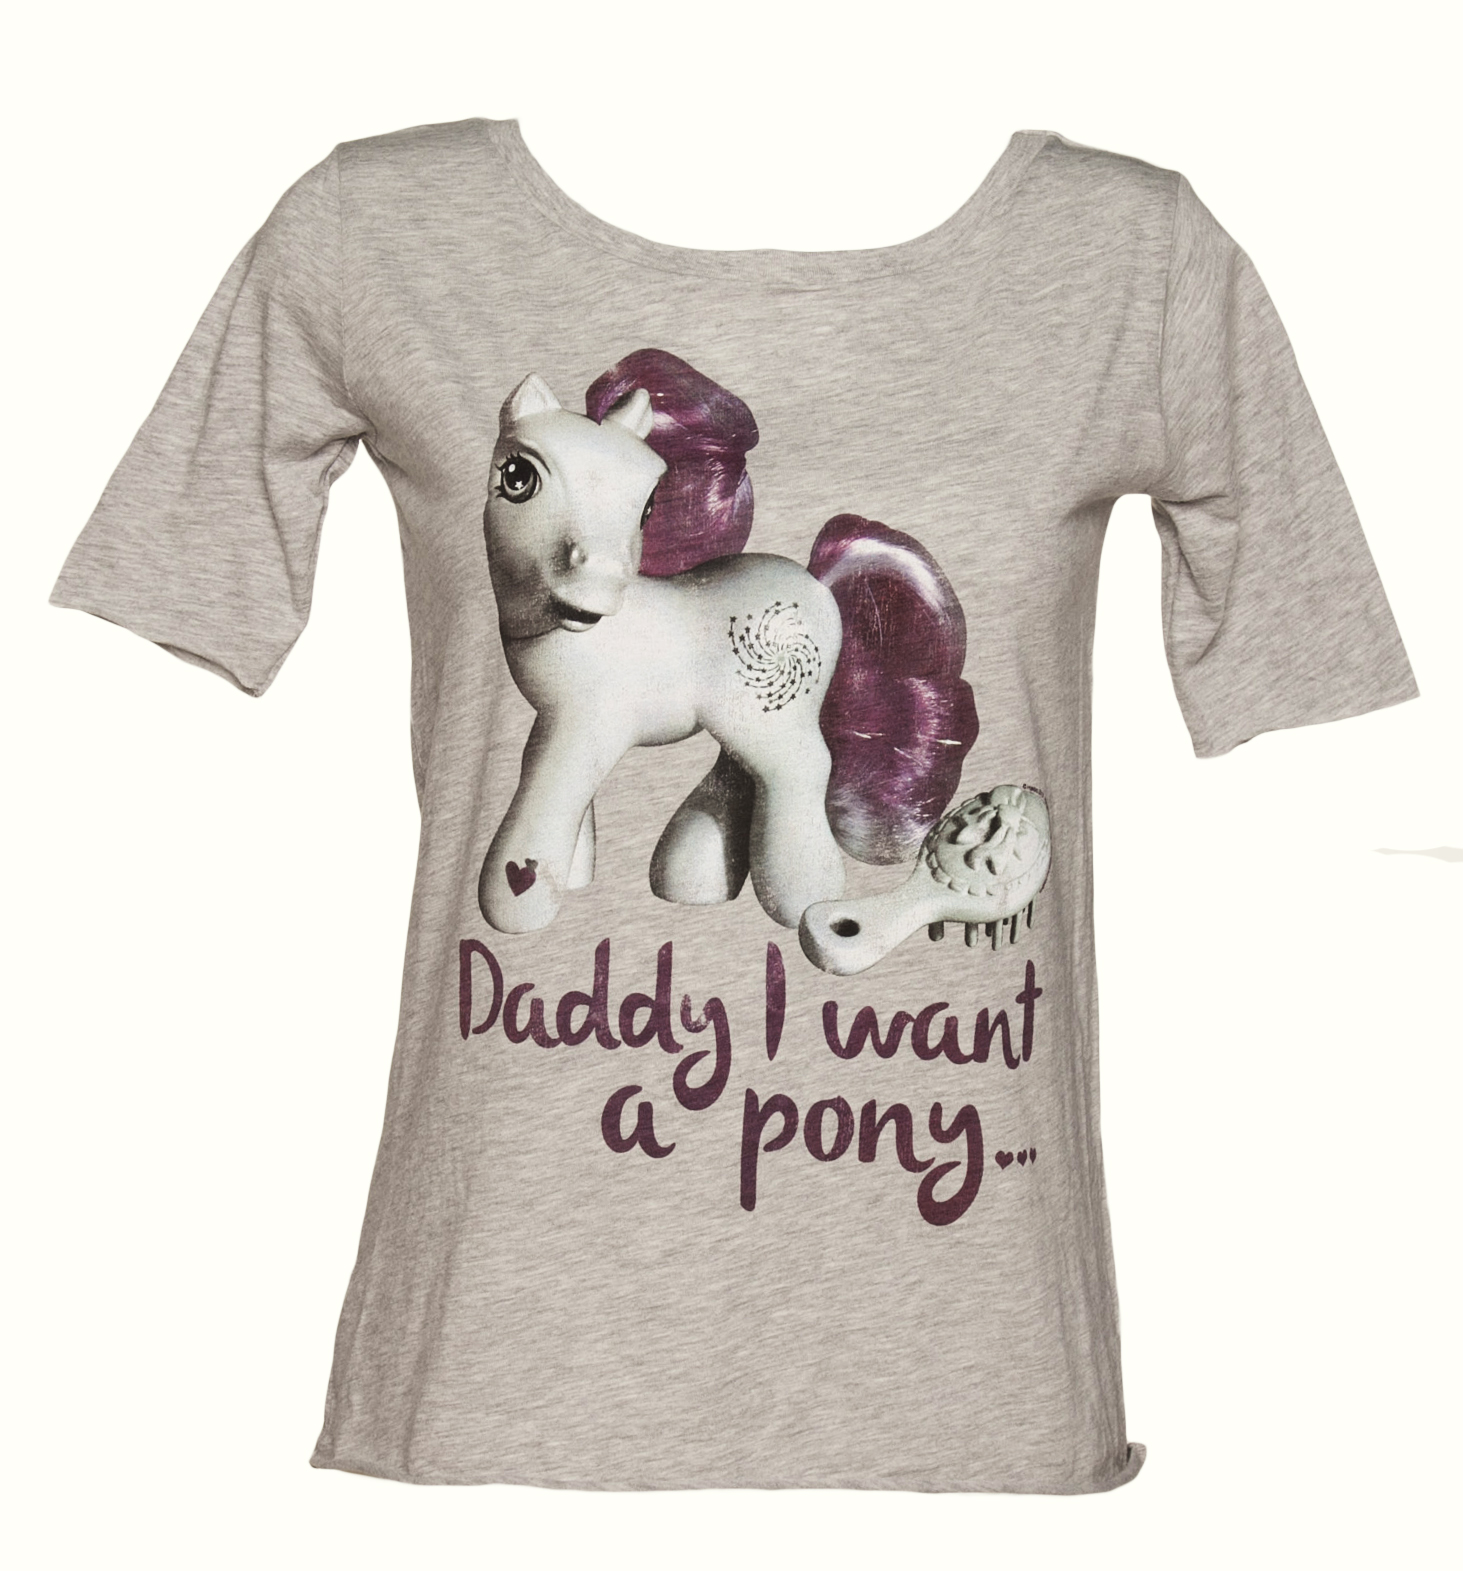 Ladies Daddy I Want A Pony Scoop Neck T-Shirt